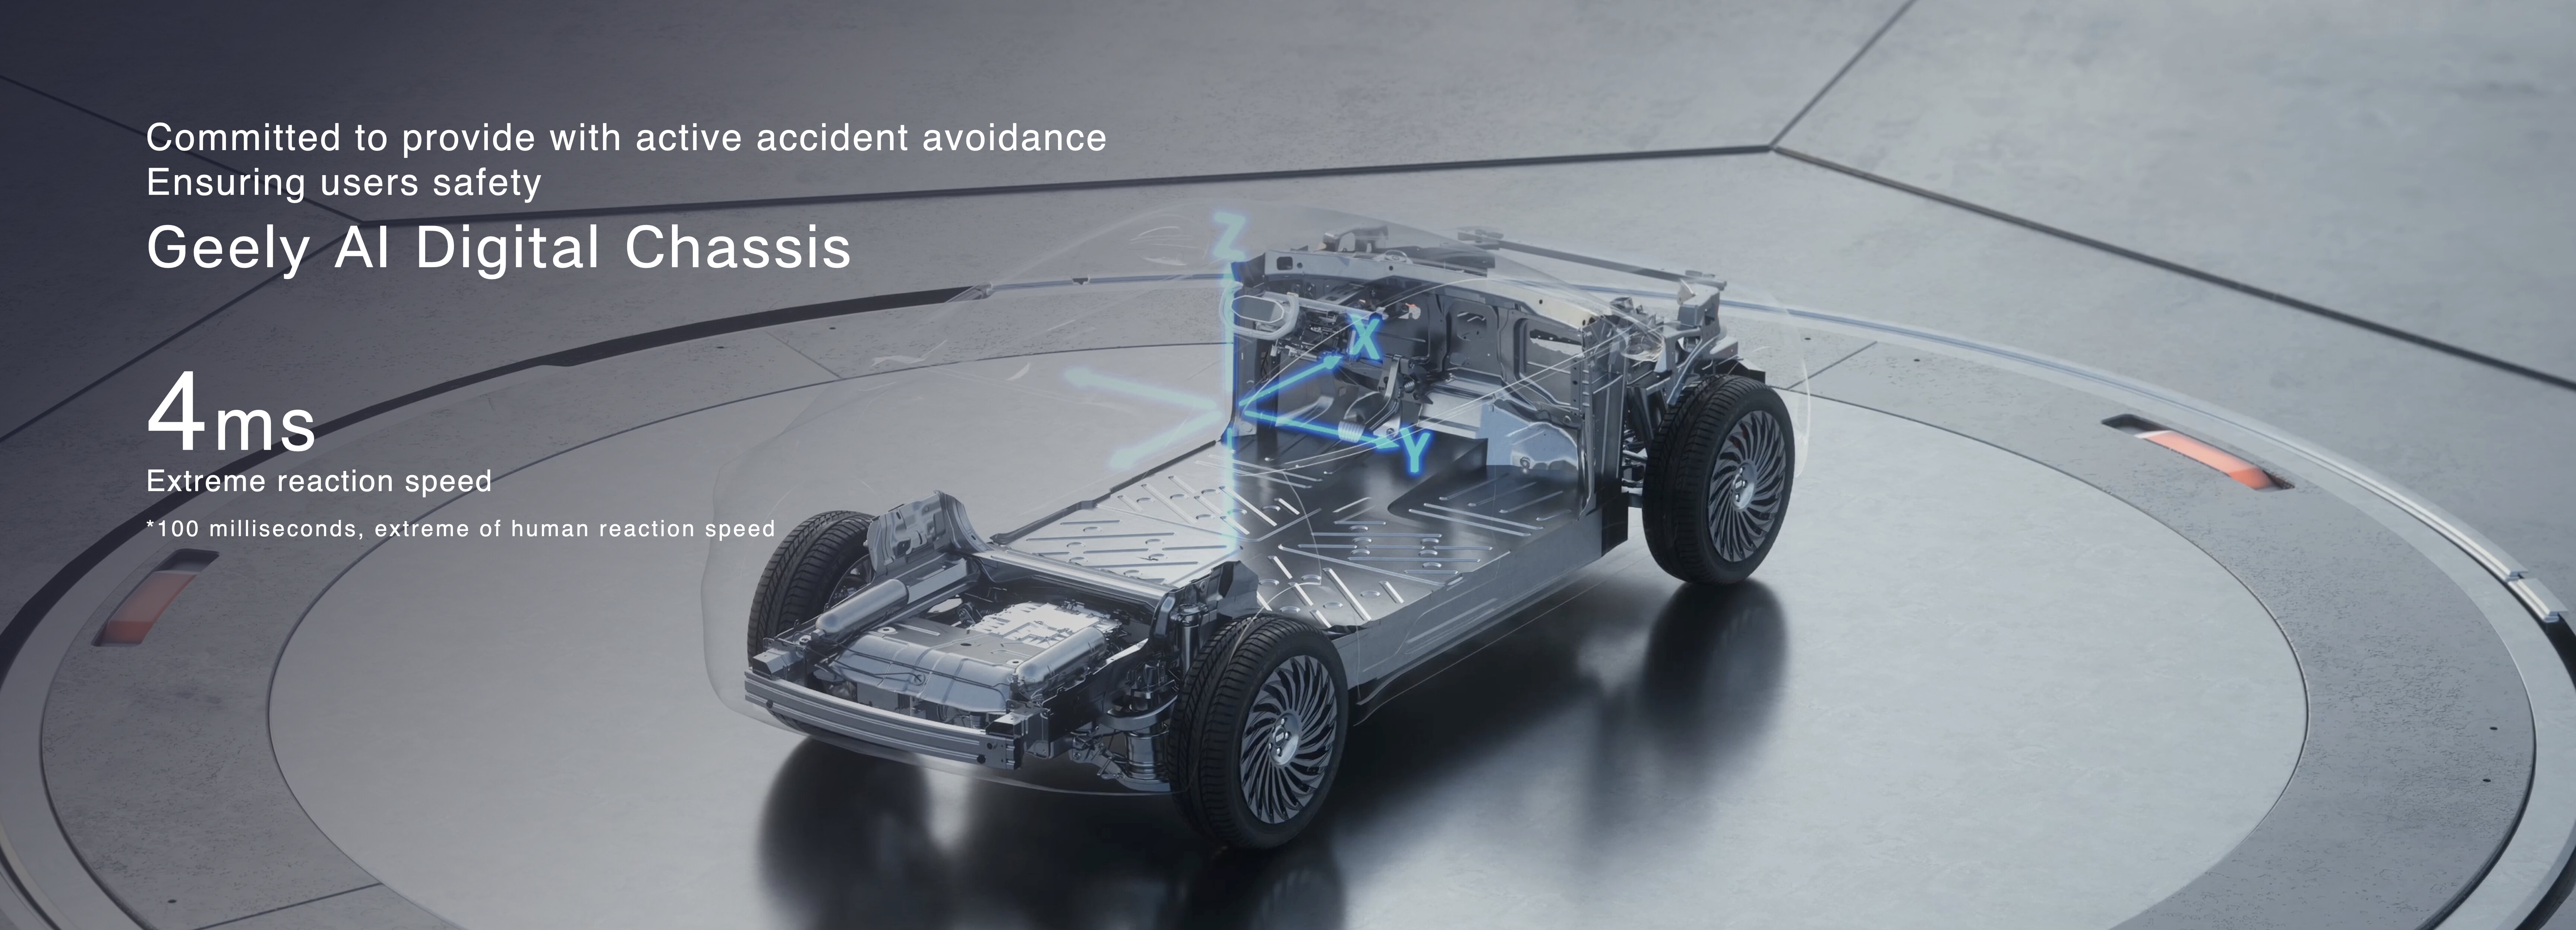 Geely AI digital chassis